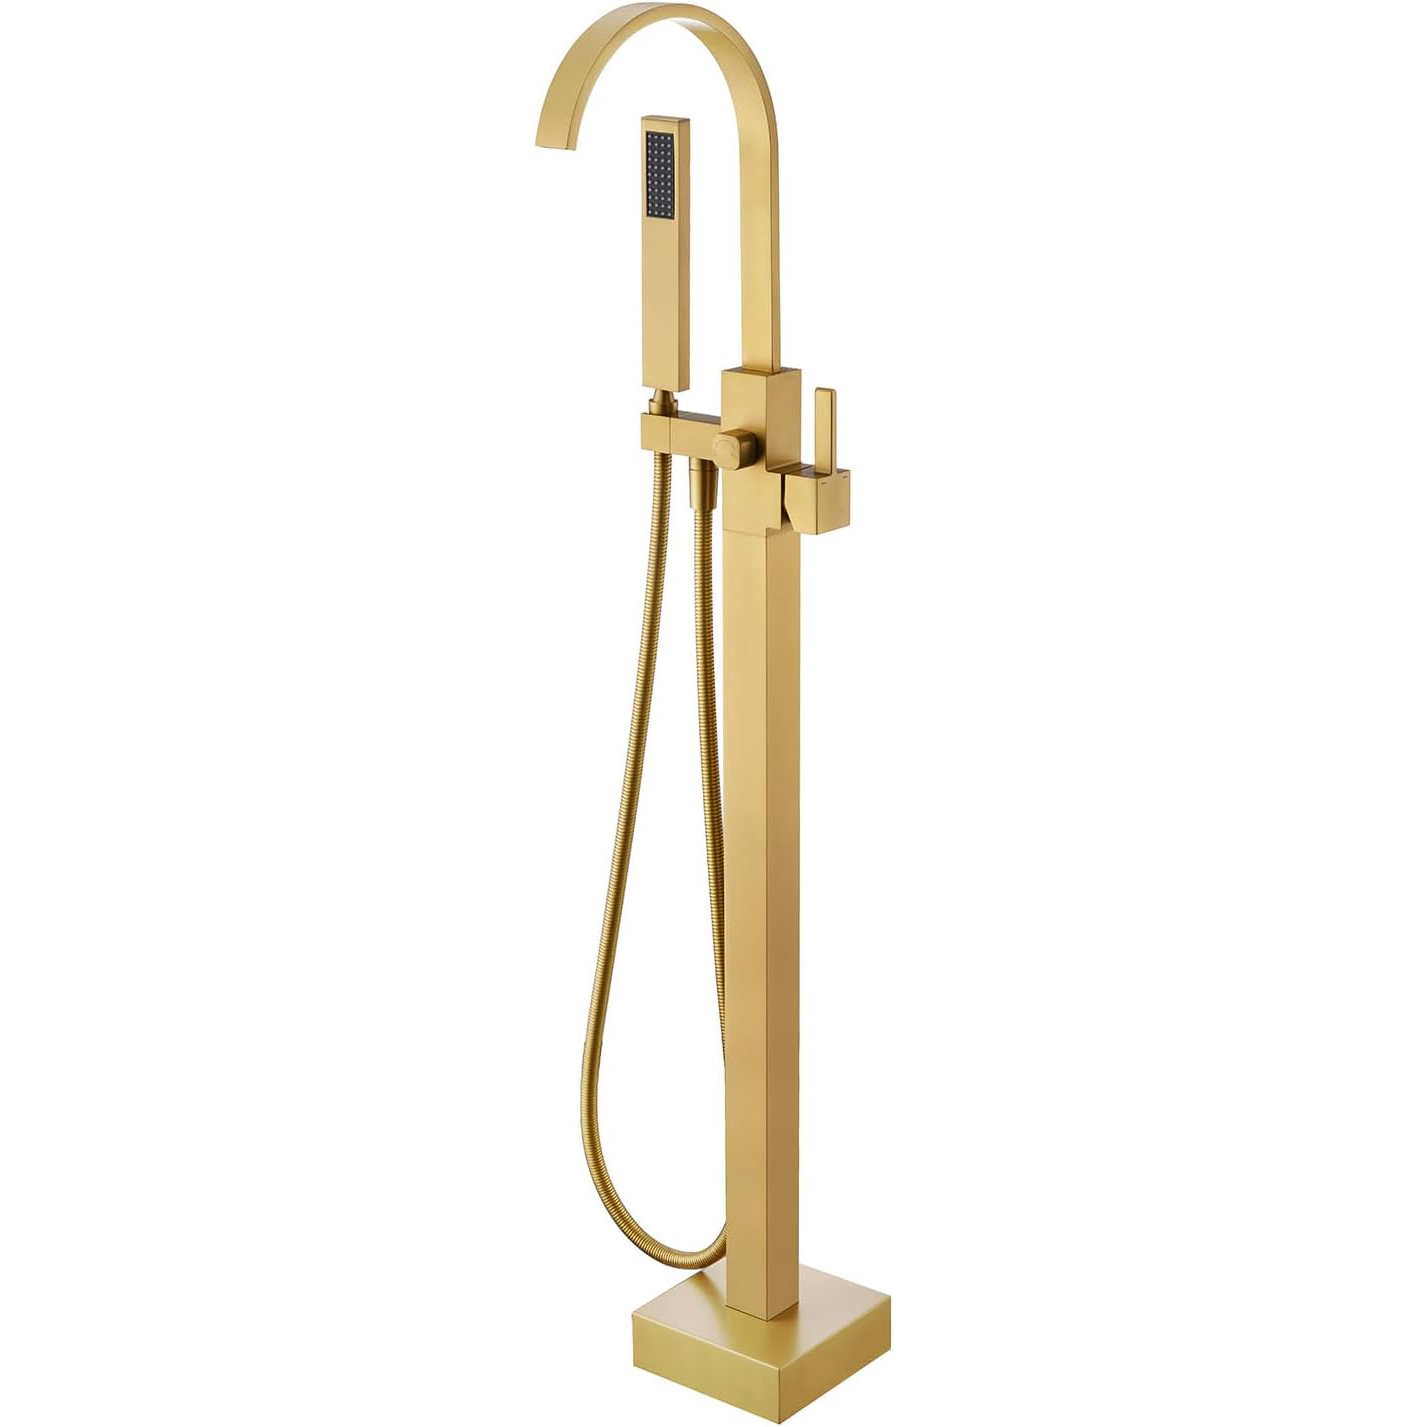 Wovier Floor Mounted Tub Filler Faucet, Freestanding Bathtub Faucet with Hand Shower W8783